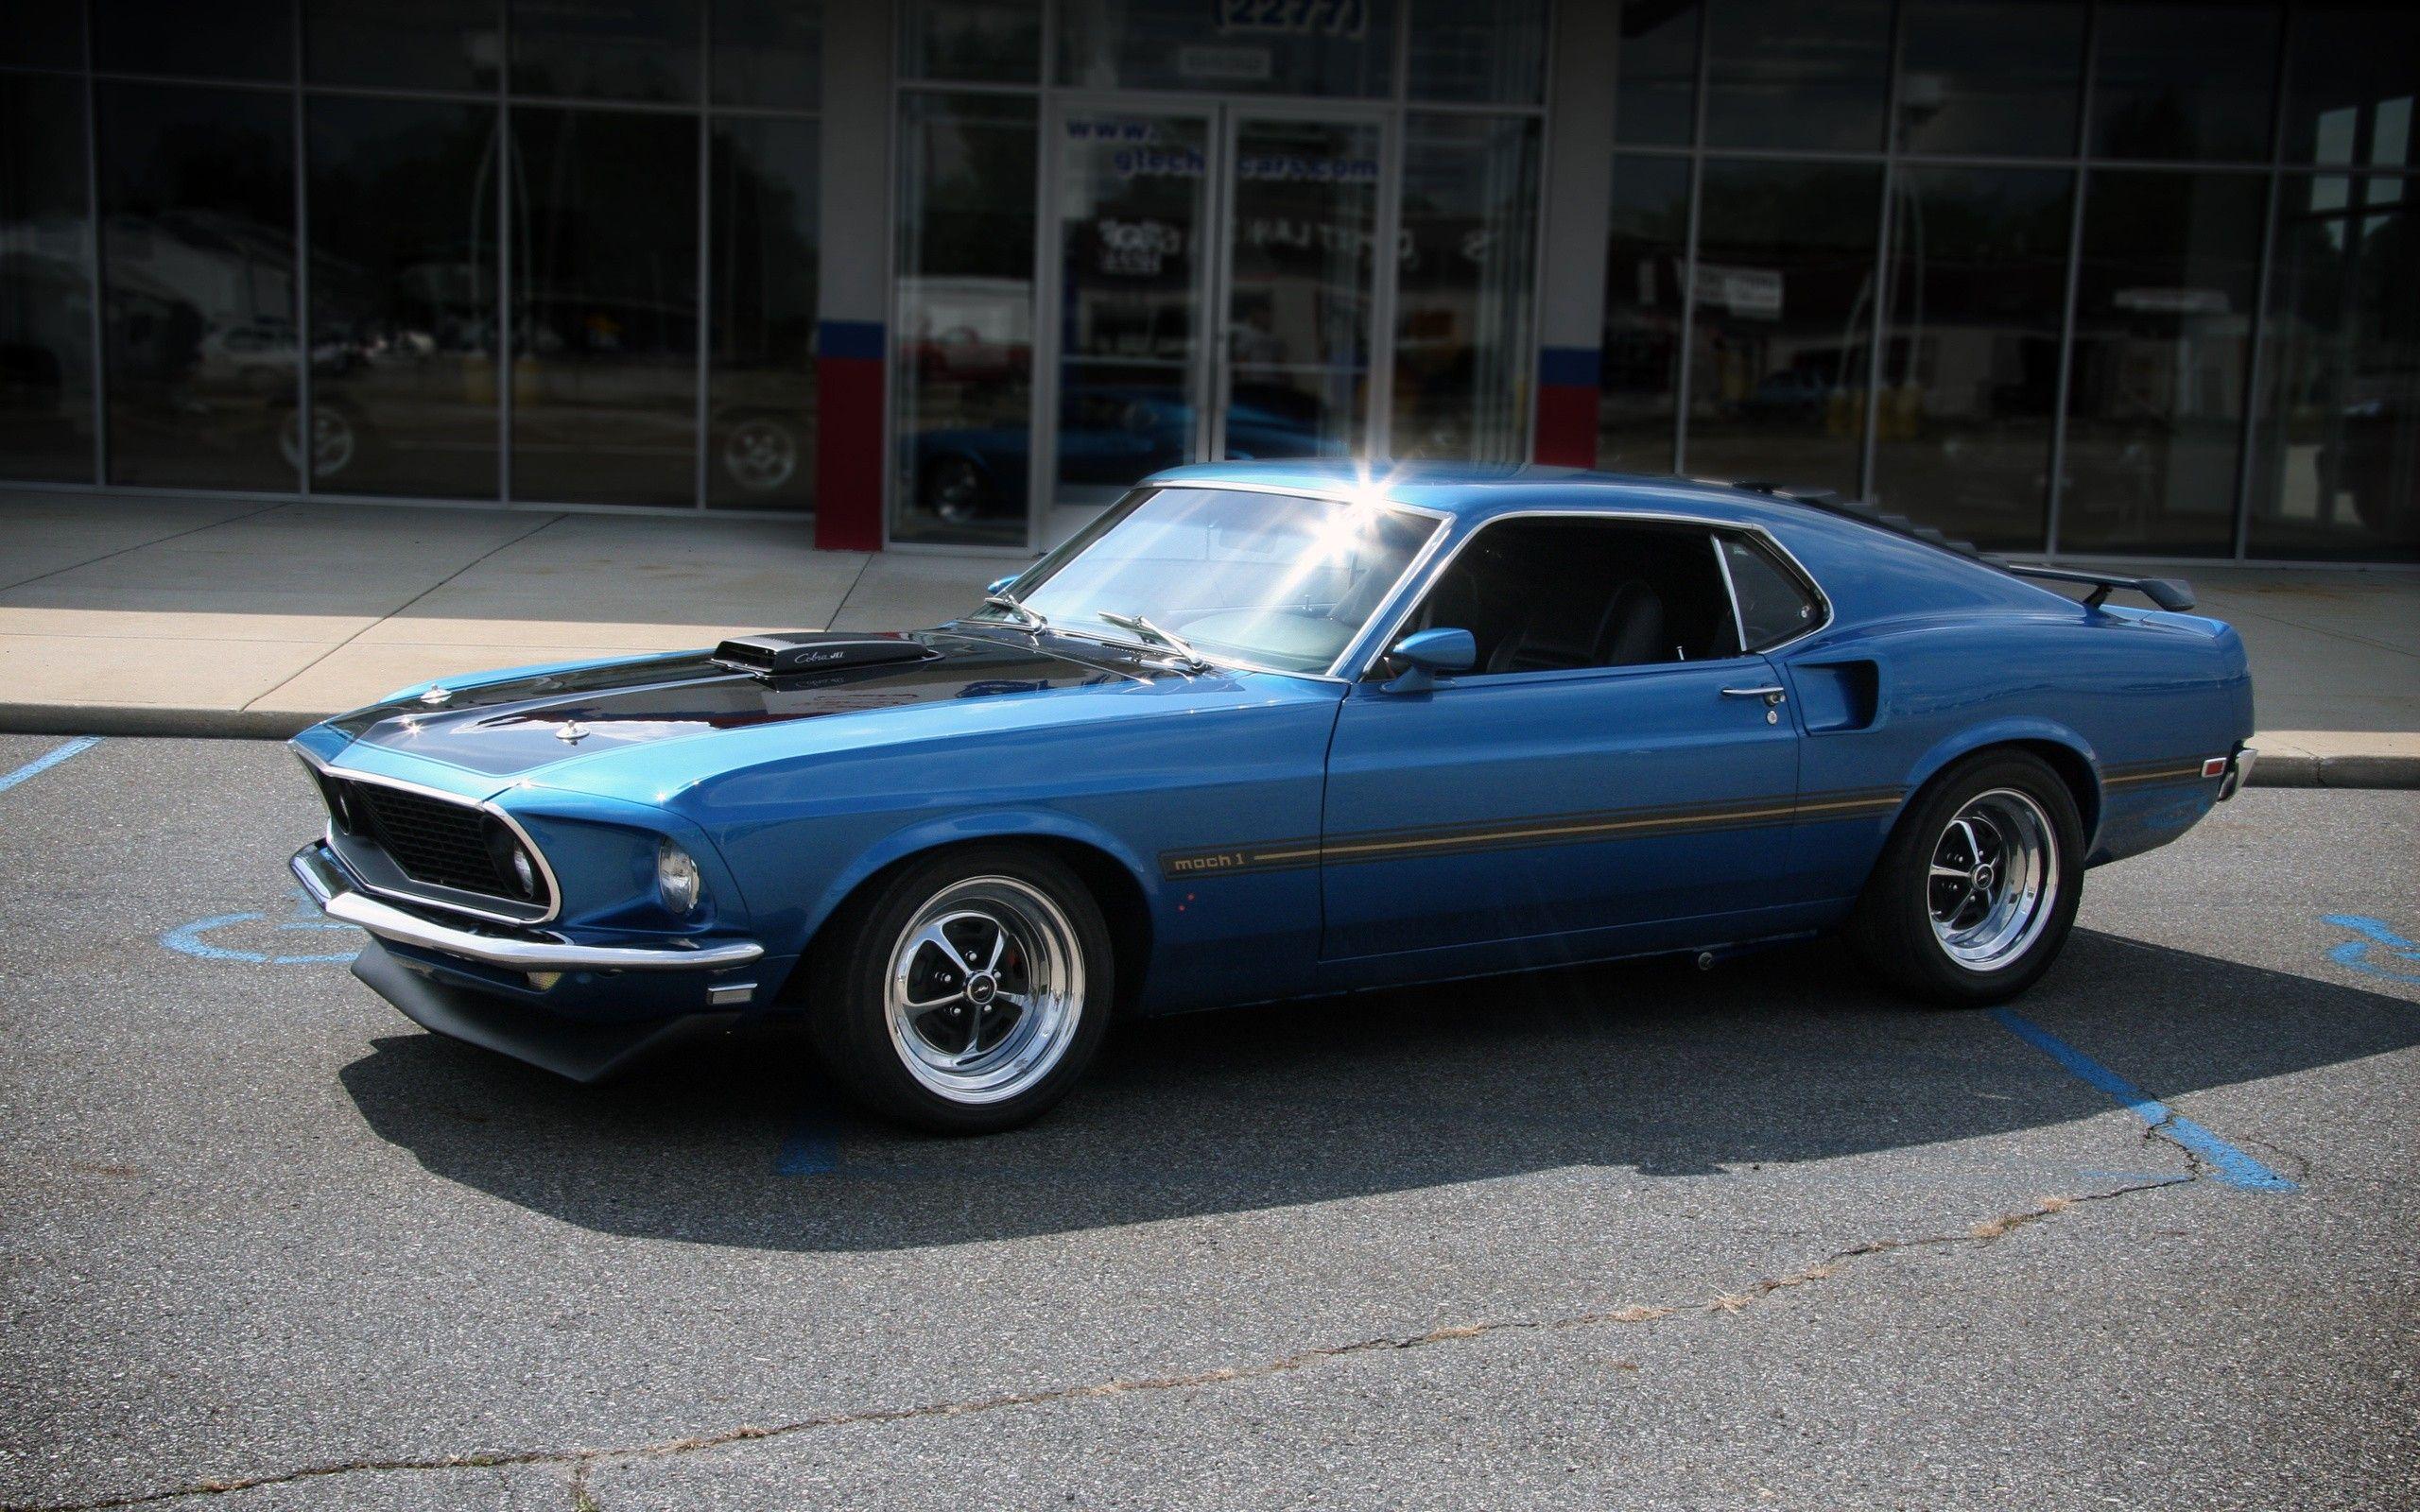 Classic Ford Mustang Wallpaper 20778 2560x1600